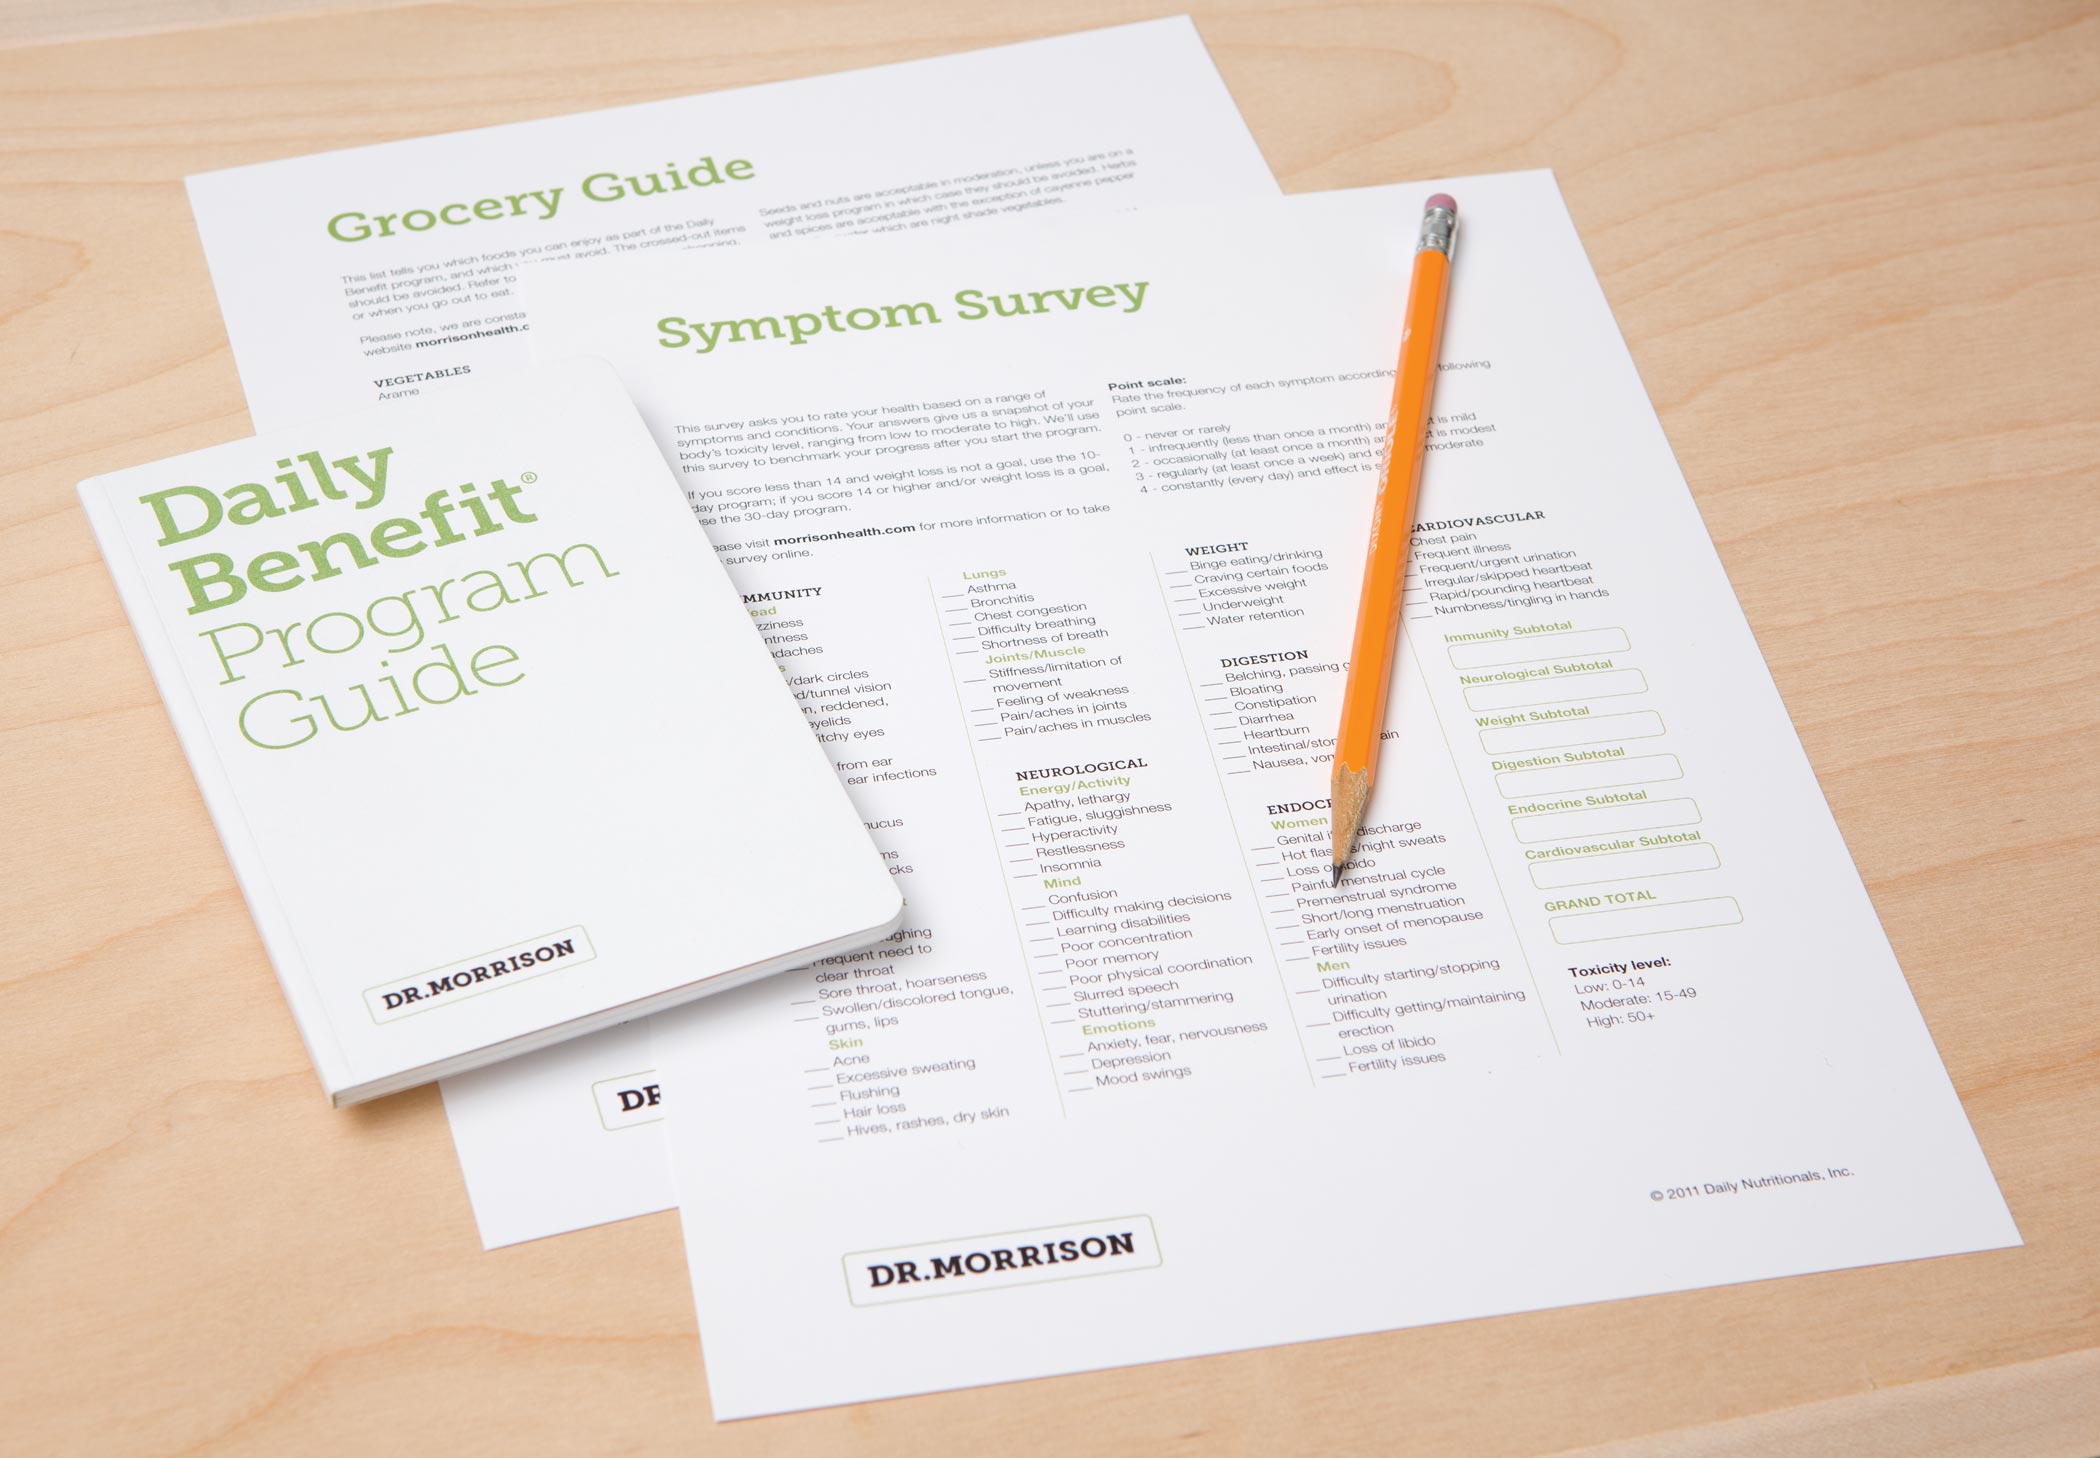 A Dr. Morrison Daily Benefit Program Guide booklet and Grocery Guide and Symptom Survey sheets.